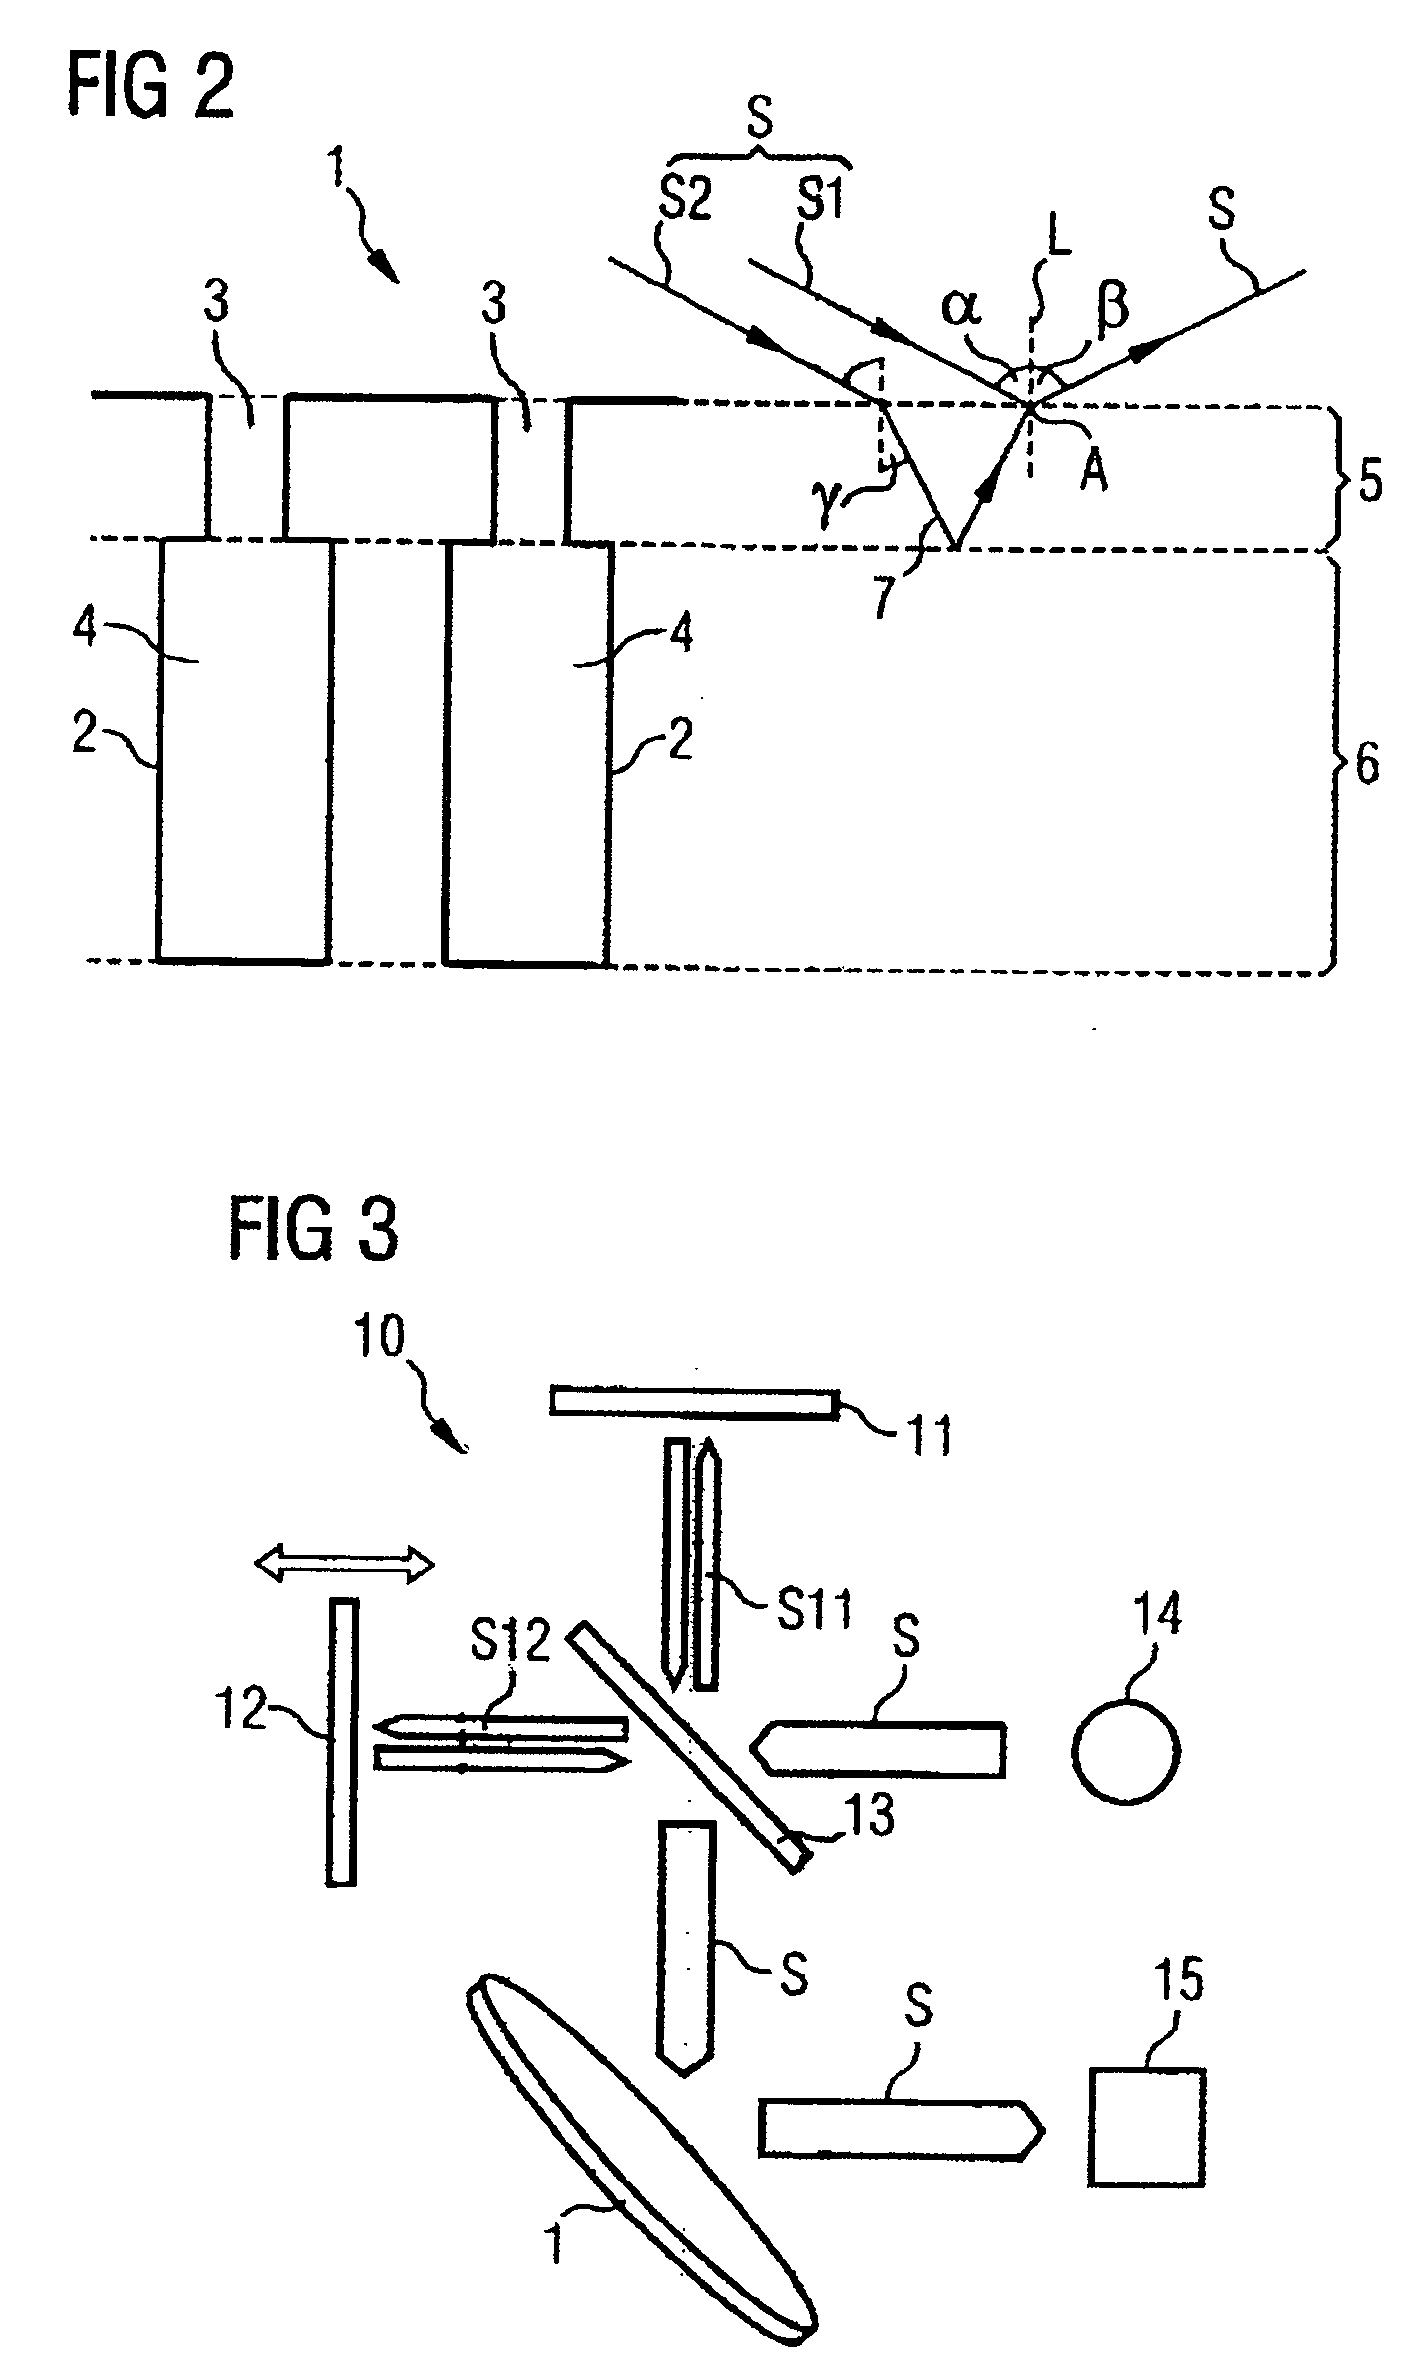 Method for determining the depth of a buried structure